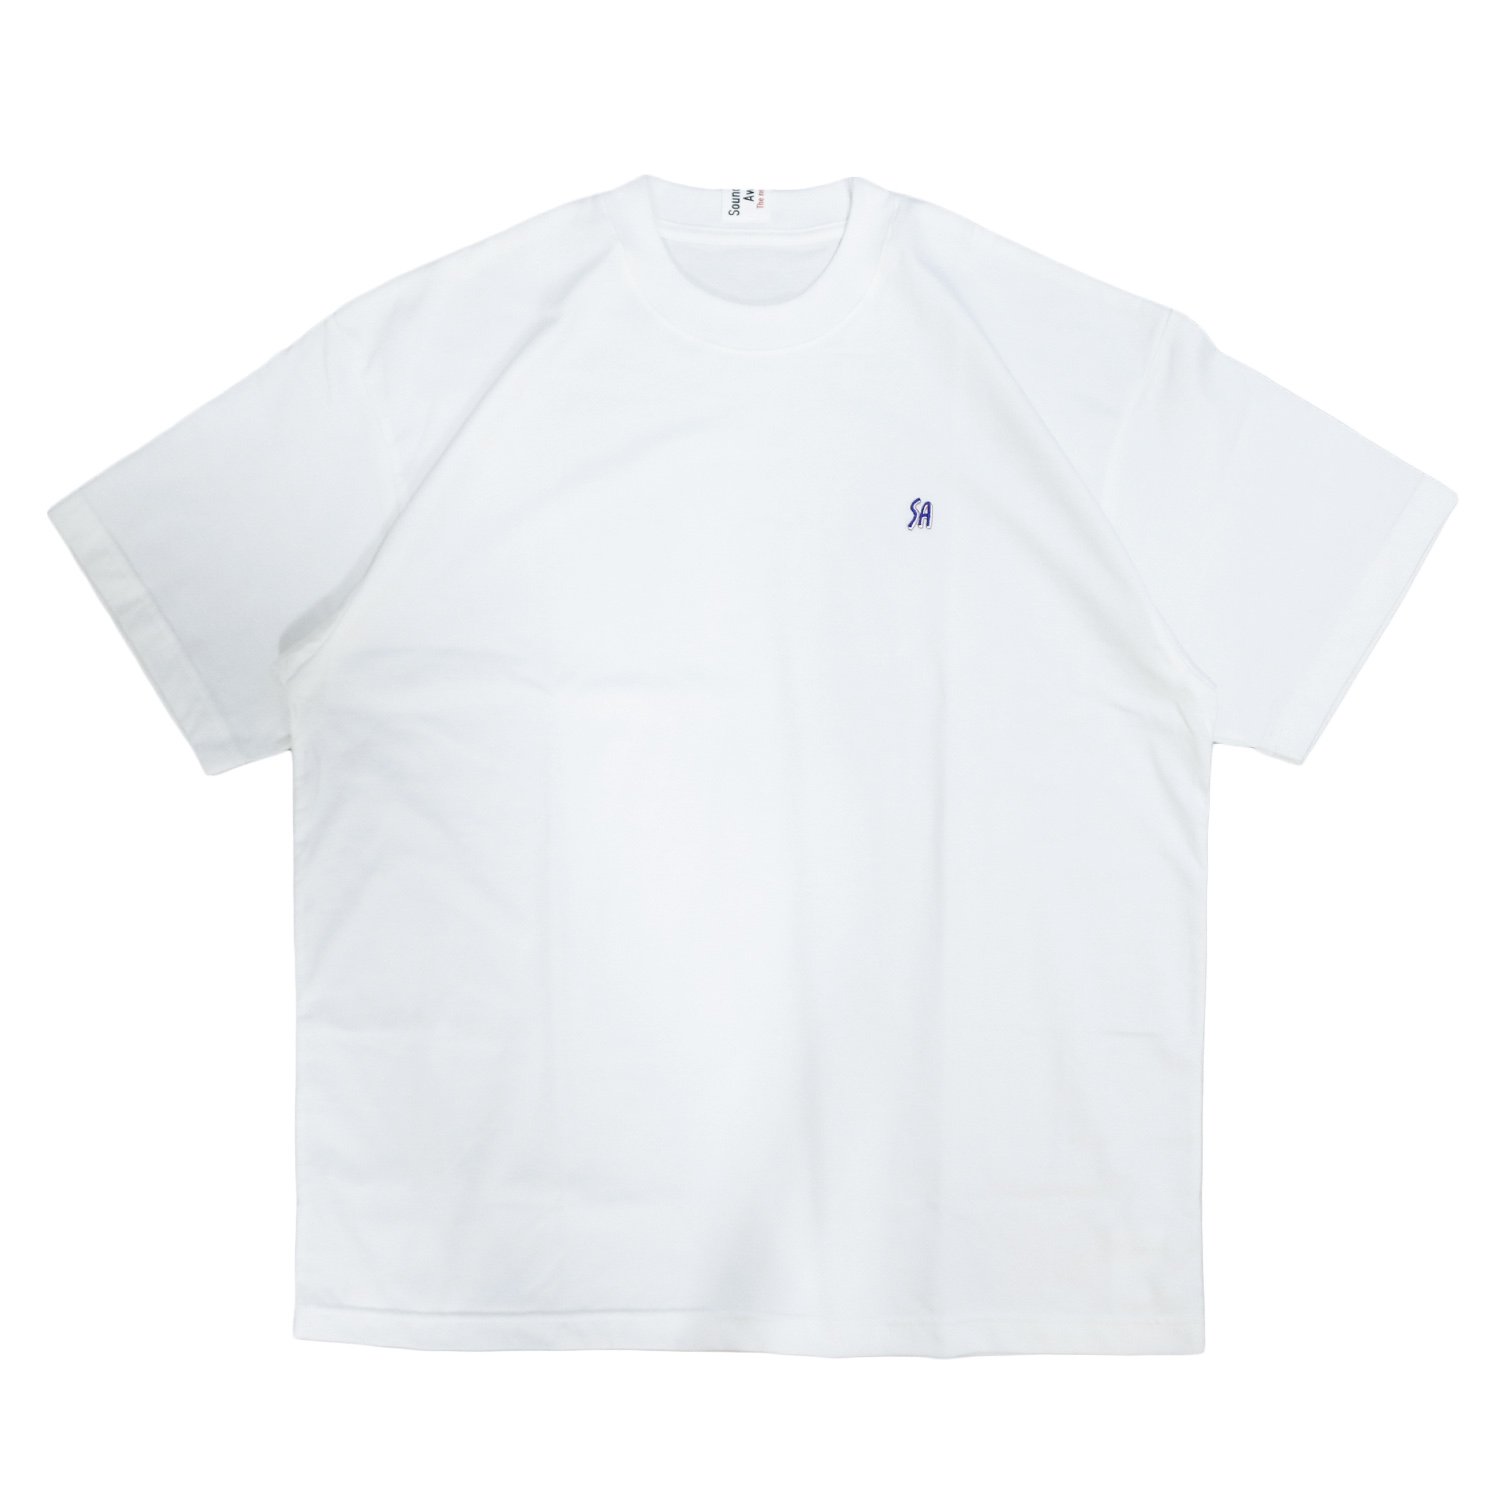 <img class='new_mark_img1' src='https://img.shop-pro.jp/img/new/icons8.gif' style='border:none;display:inline;margin:0px;padding:0px;width:auto;' />SOUNDS AWESOME /  SA Logo embroidery  T-shirt